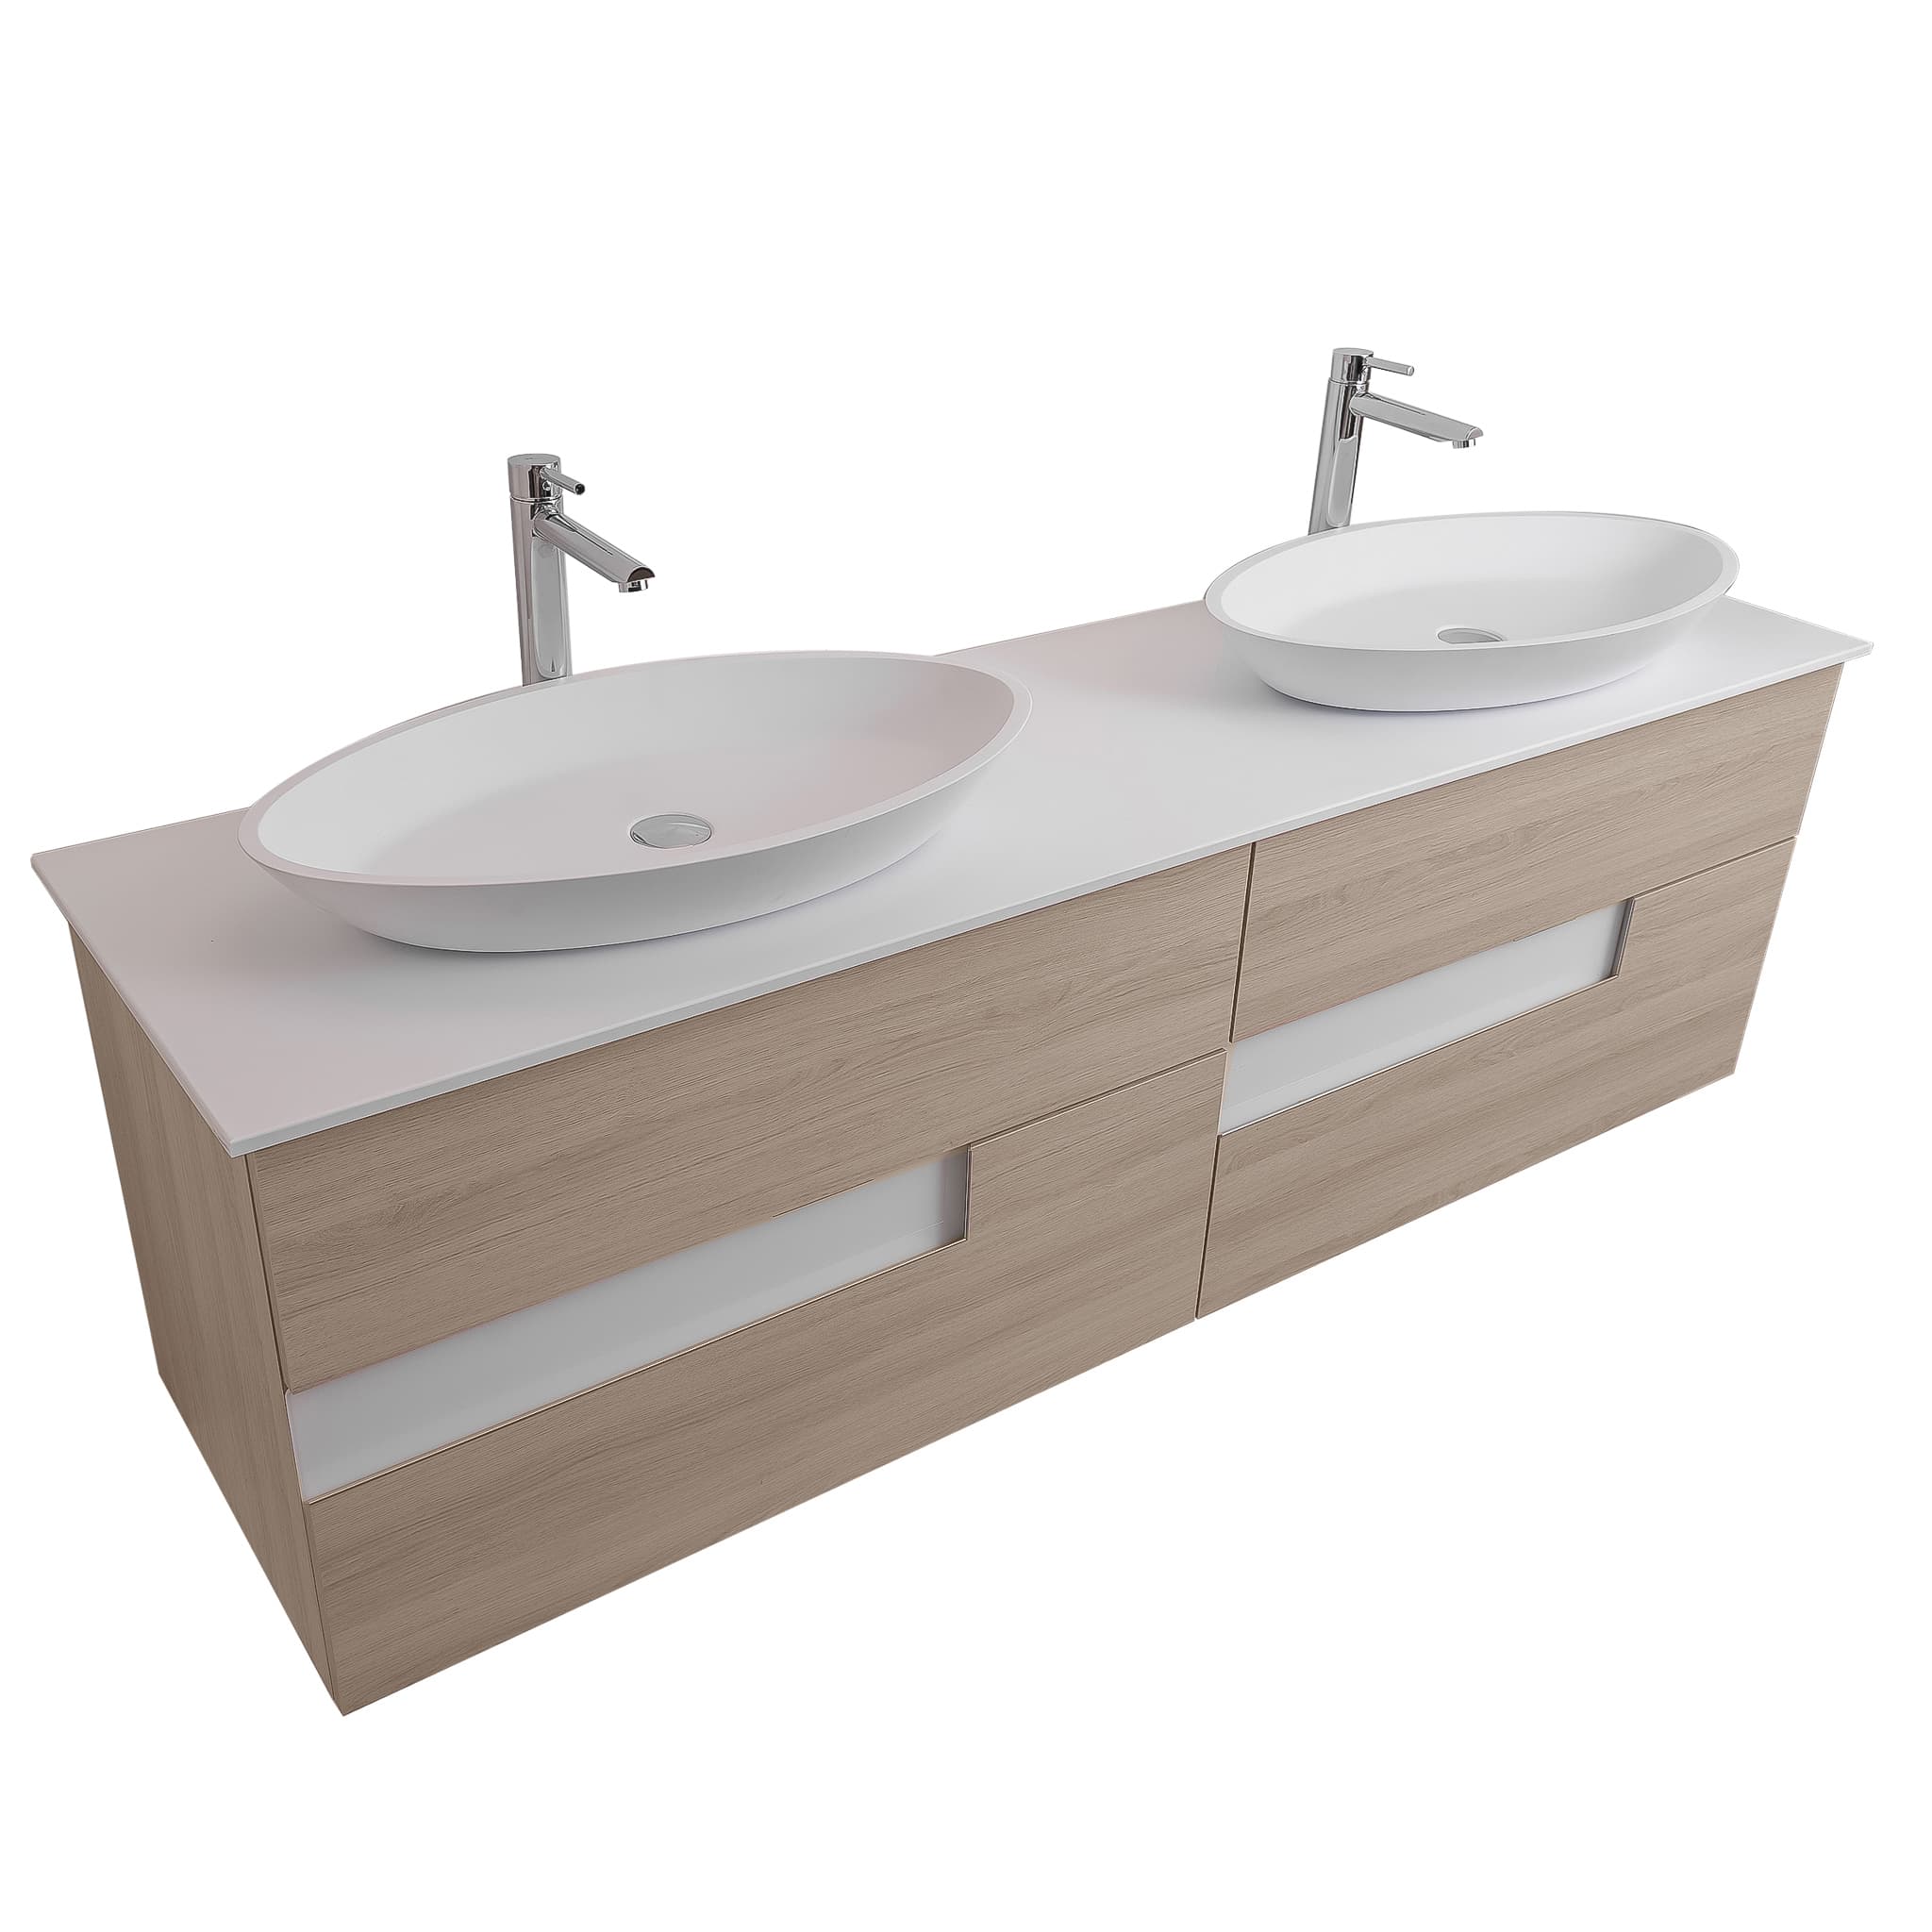 Vision 63 Natural Light Wood Cabinet, Solid Surface Flat White Counter And Two Oval Solid Surface White Basin 1305, Wall Mounted Modern Vanity Set